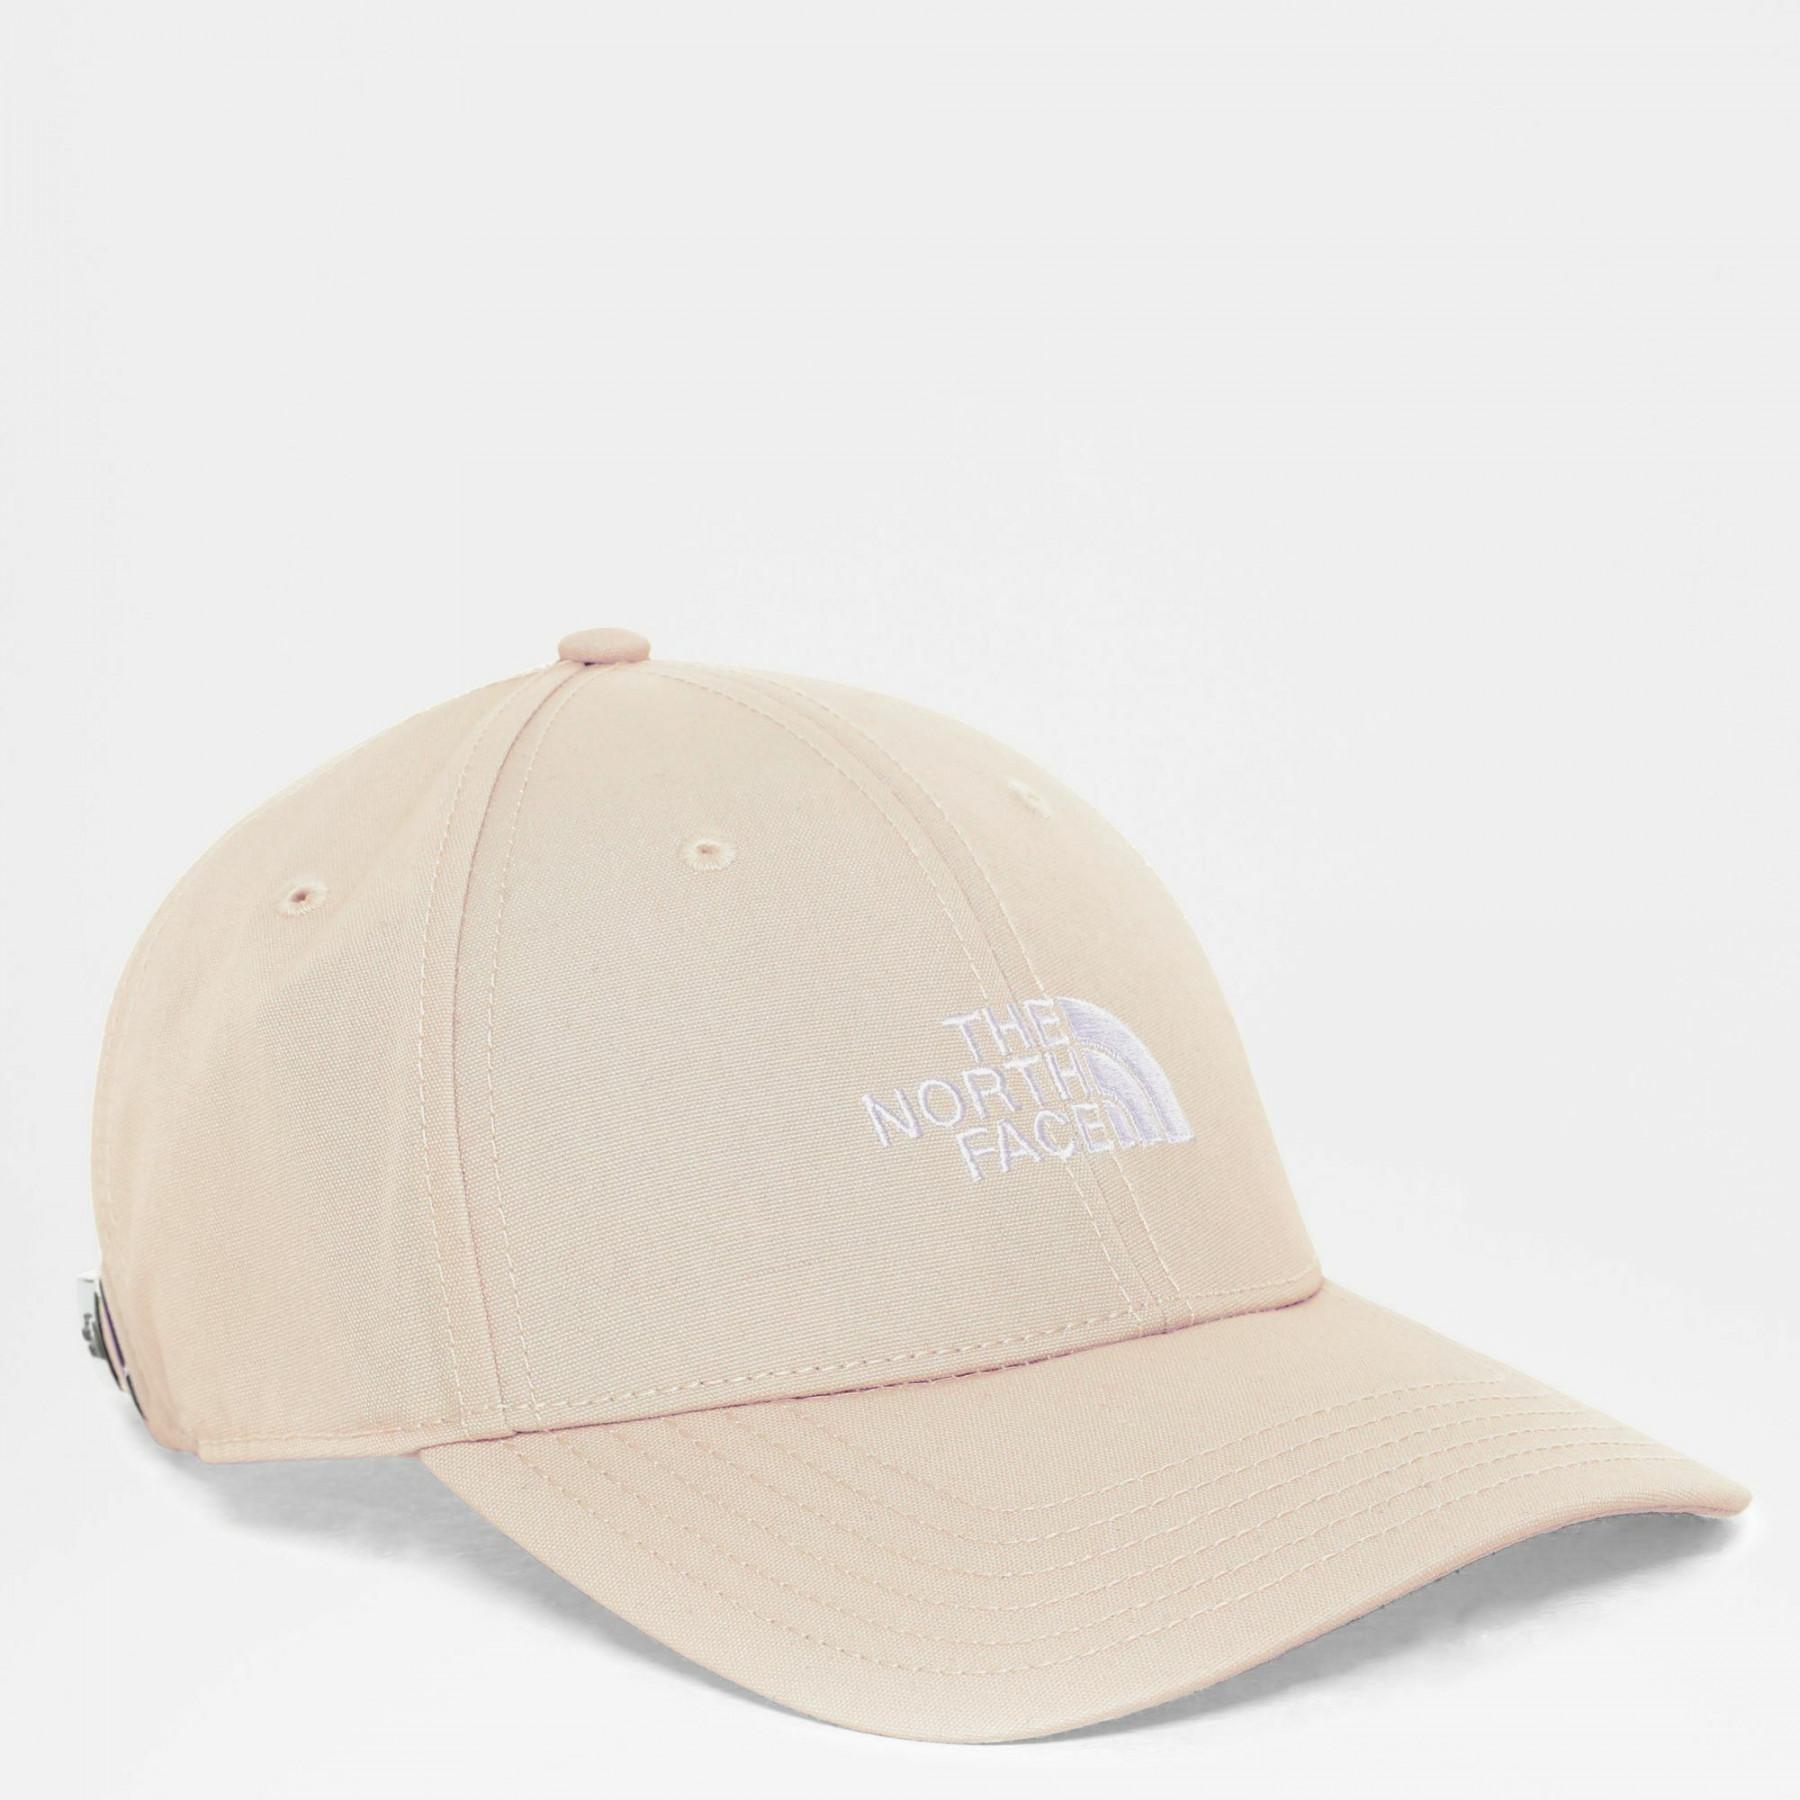 Kapsyl The North Face Recycled 66 Classic